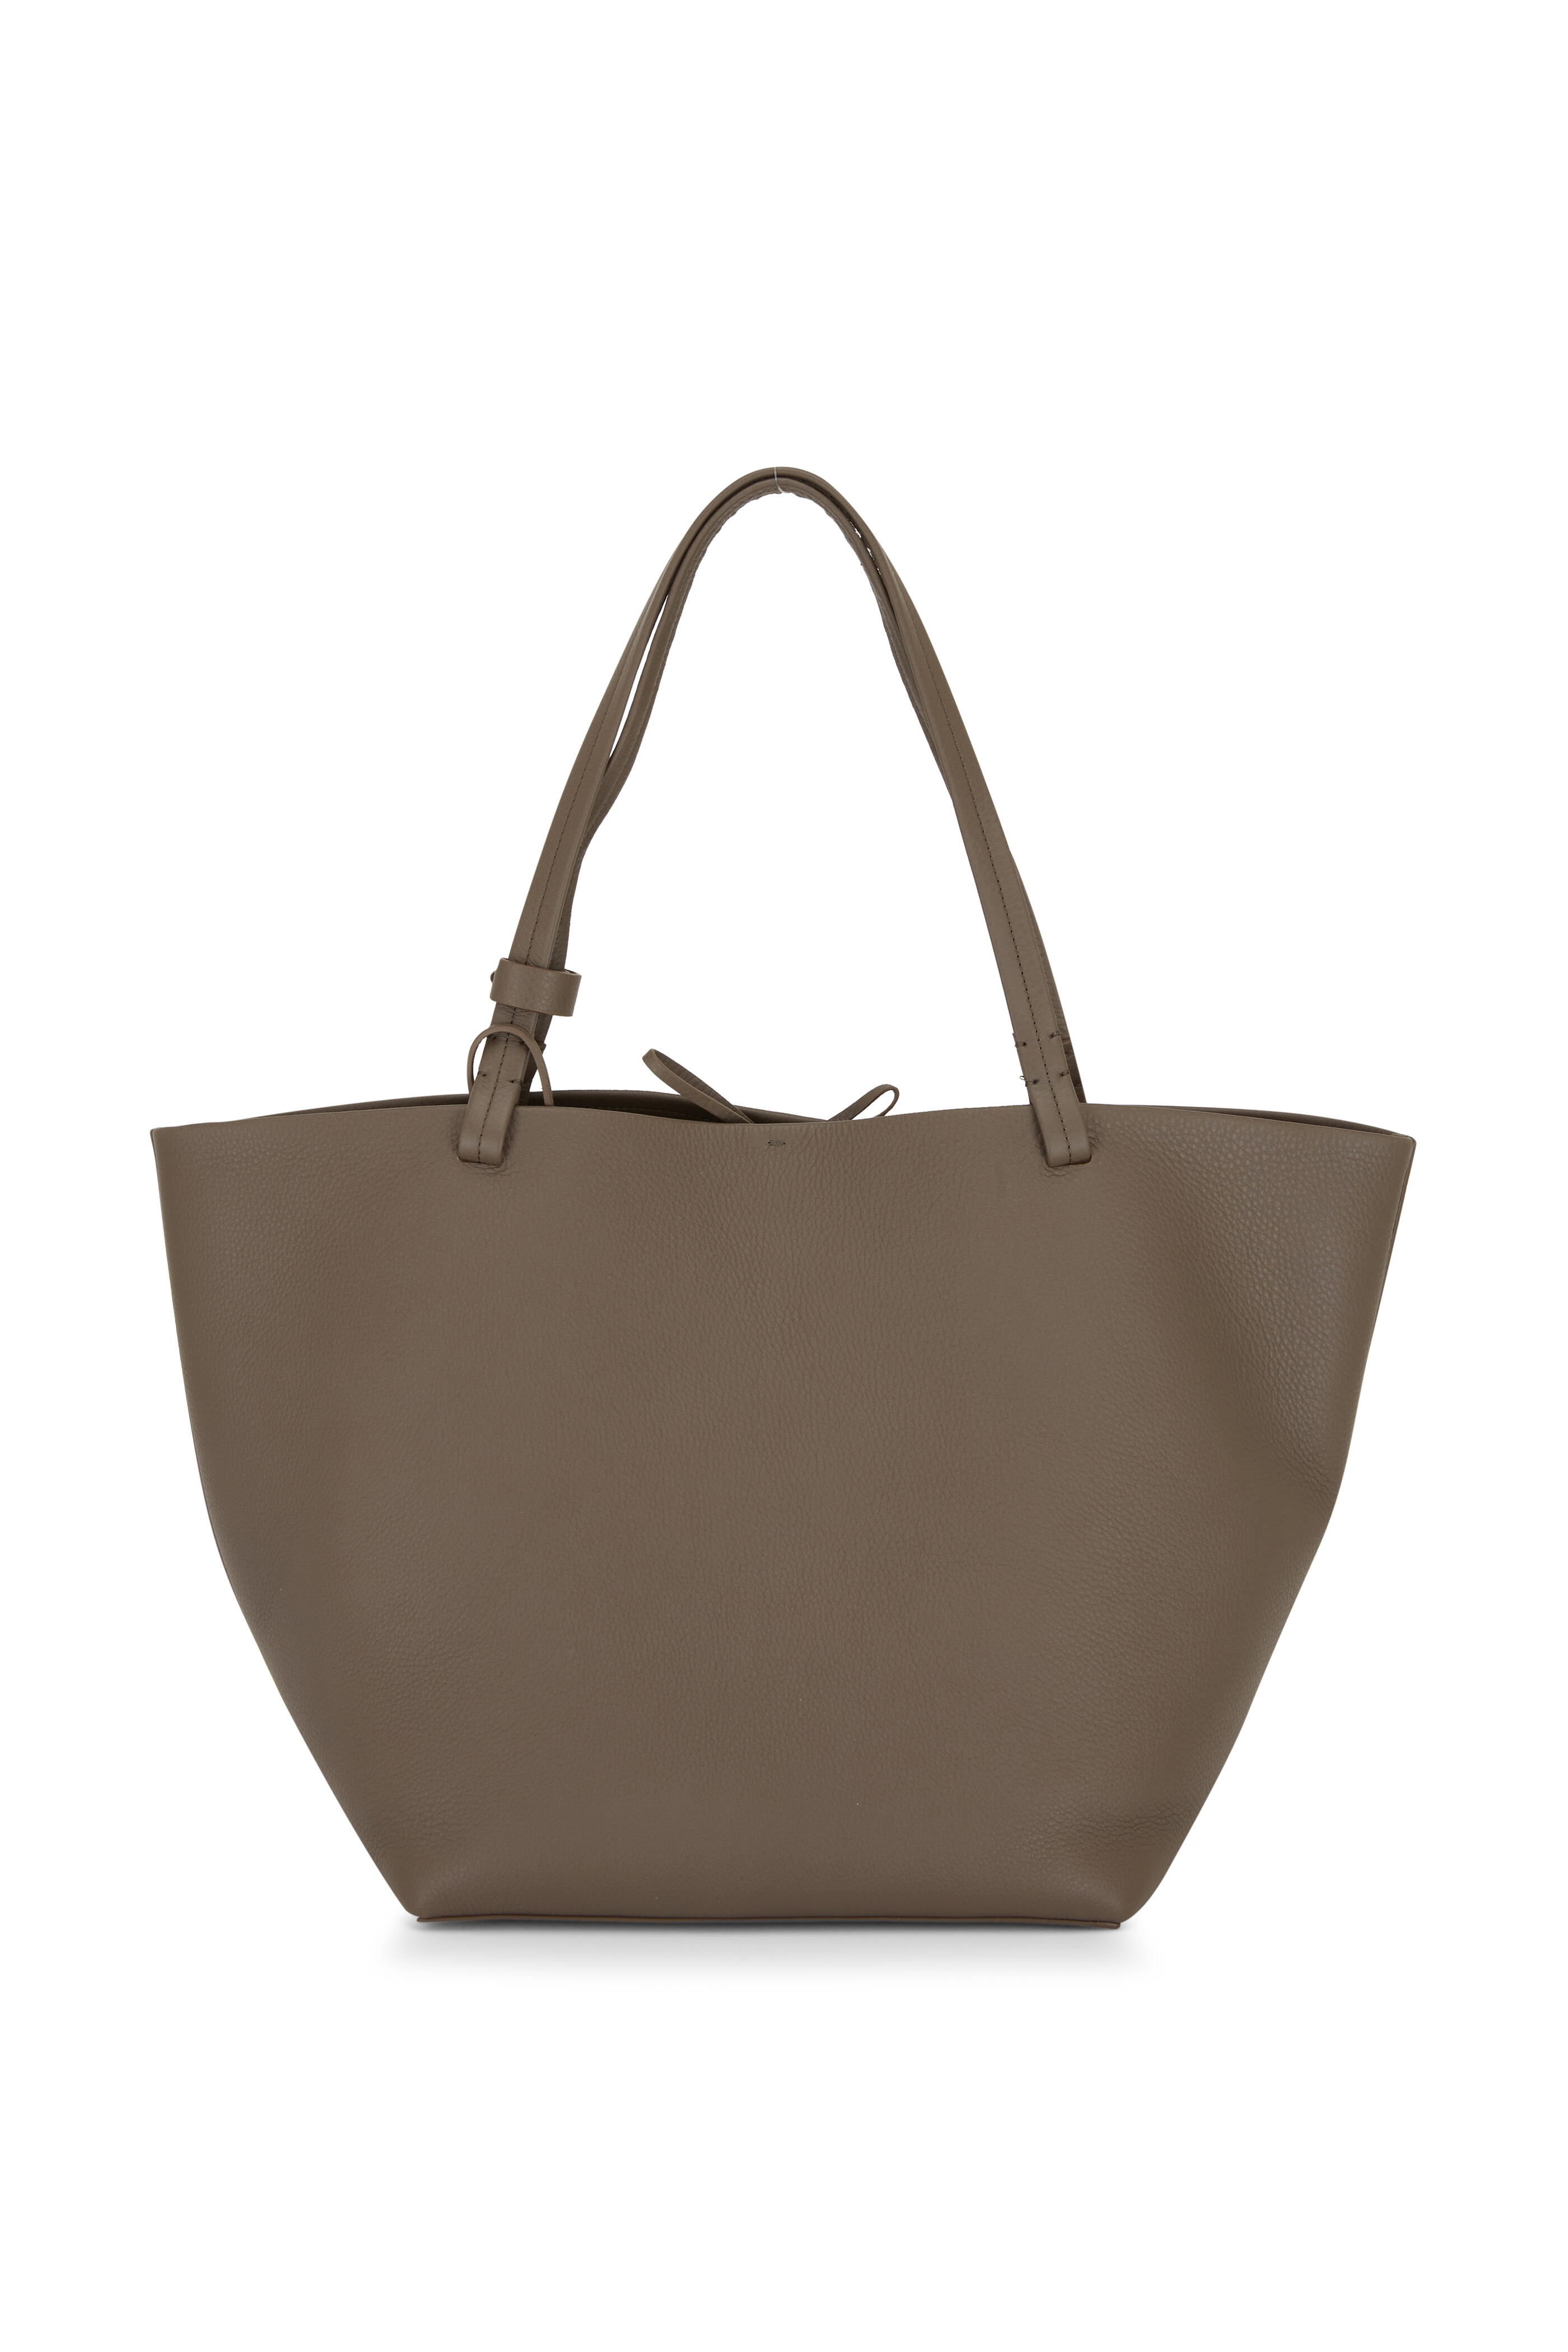 The Row - Park Tote Three Elephant Gray Leather Tote